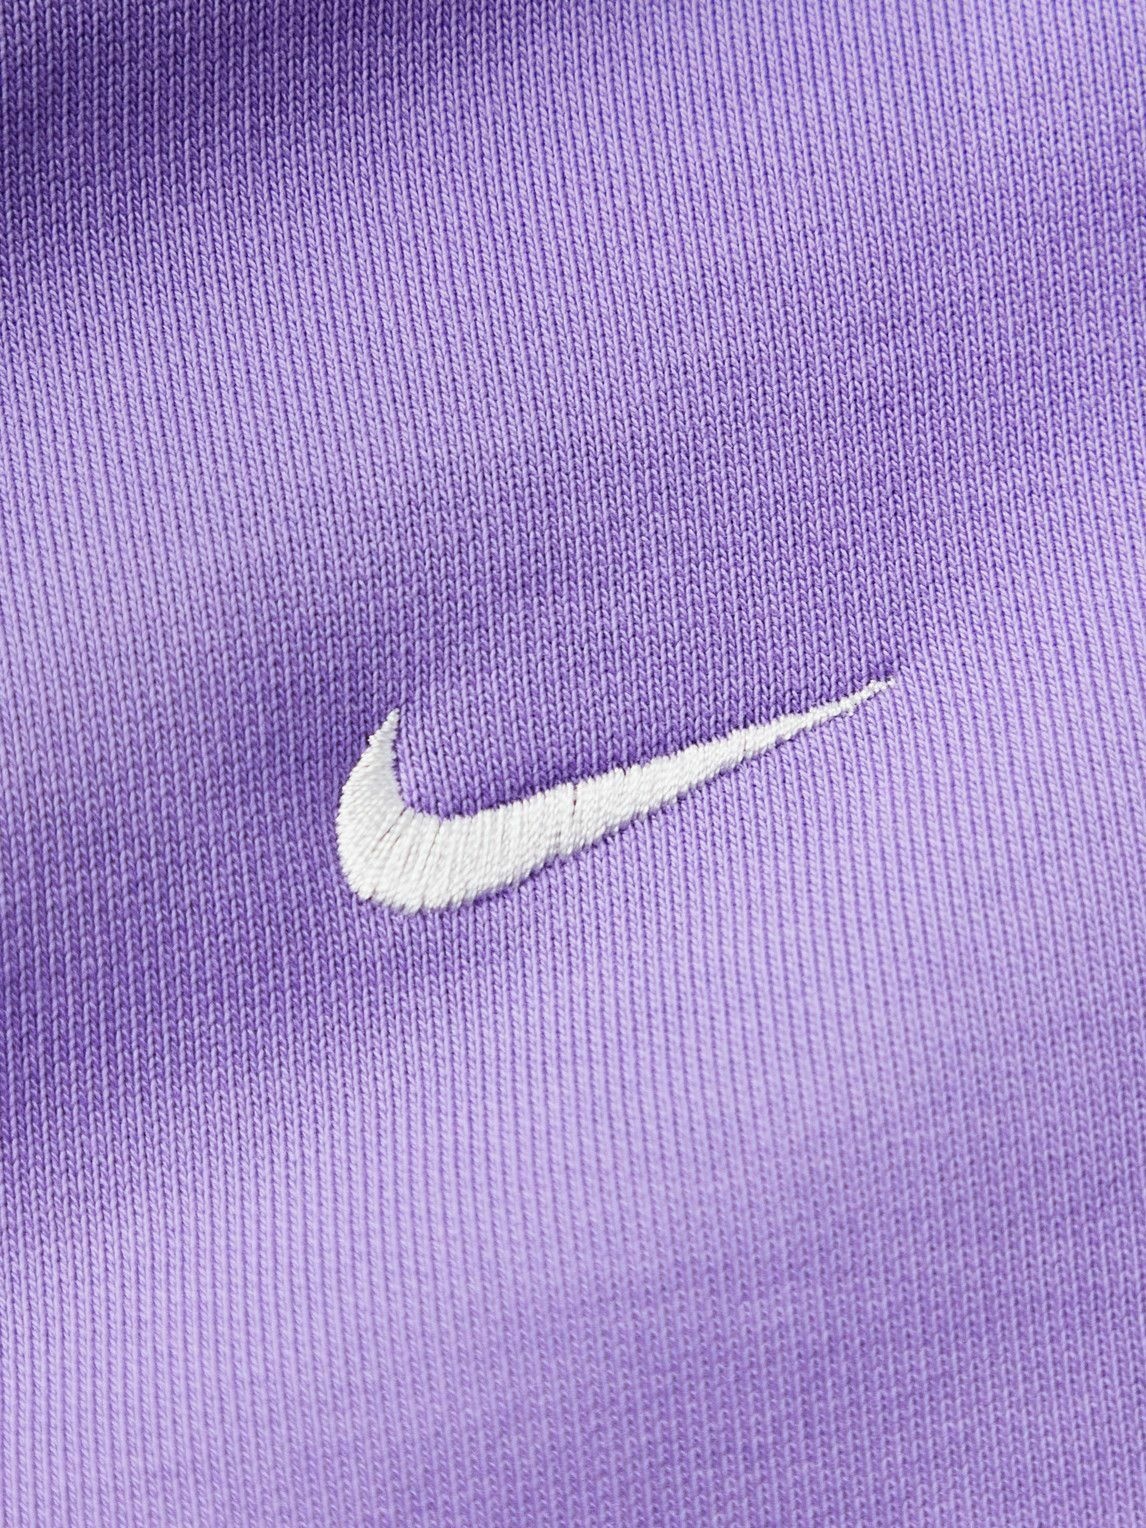 Nike - Logo-Embroidered Cotton-Blend Jersey Hoodie - Purple Nike